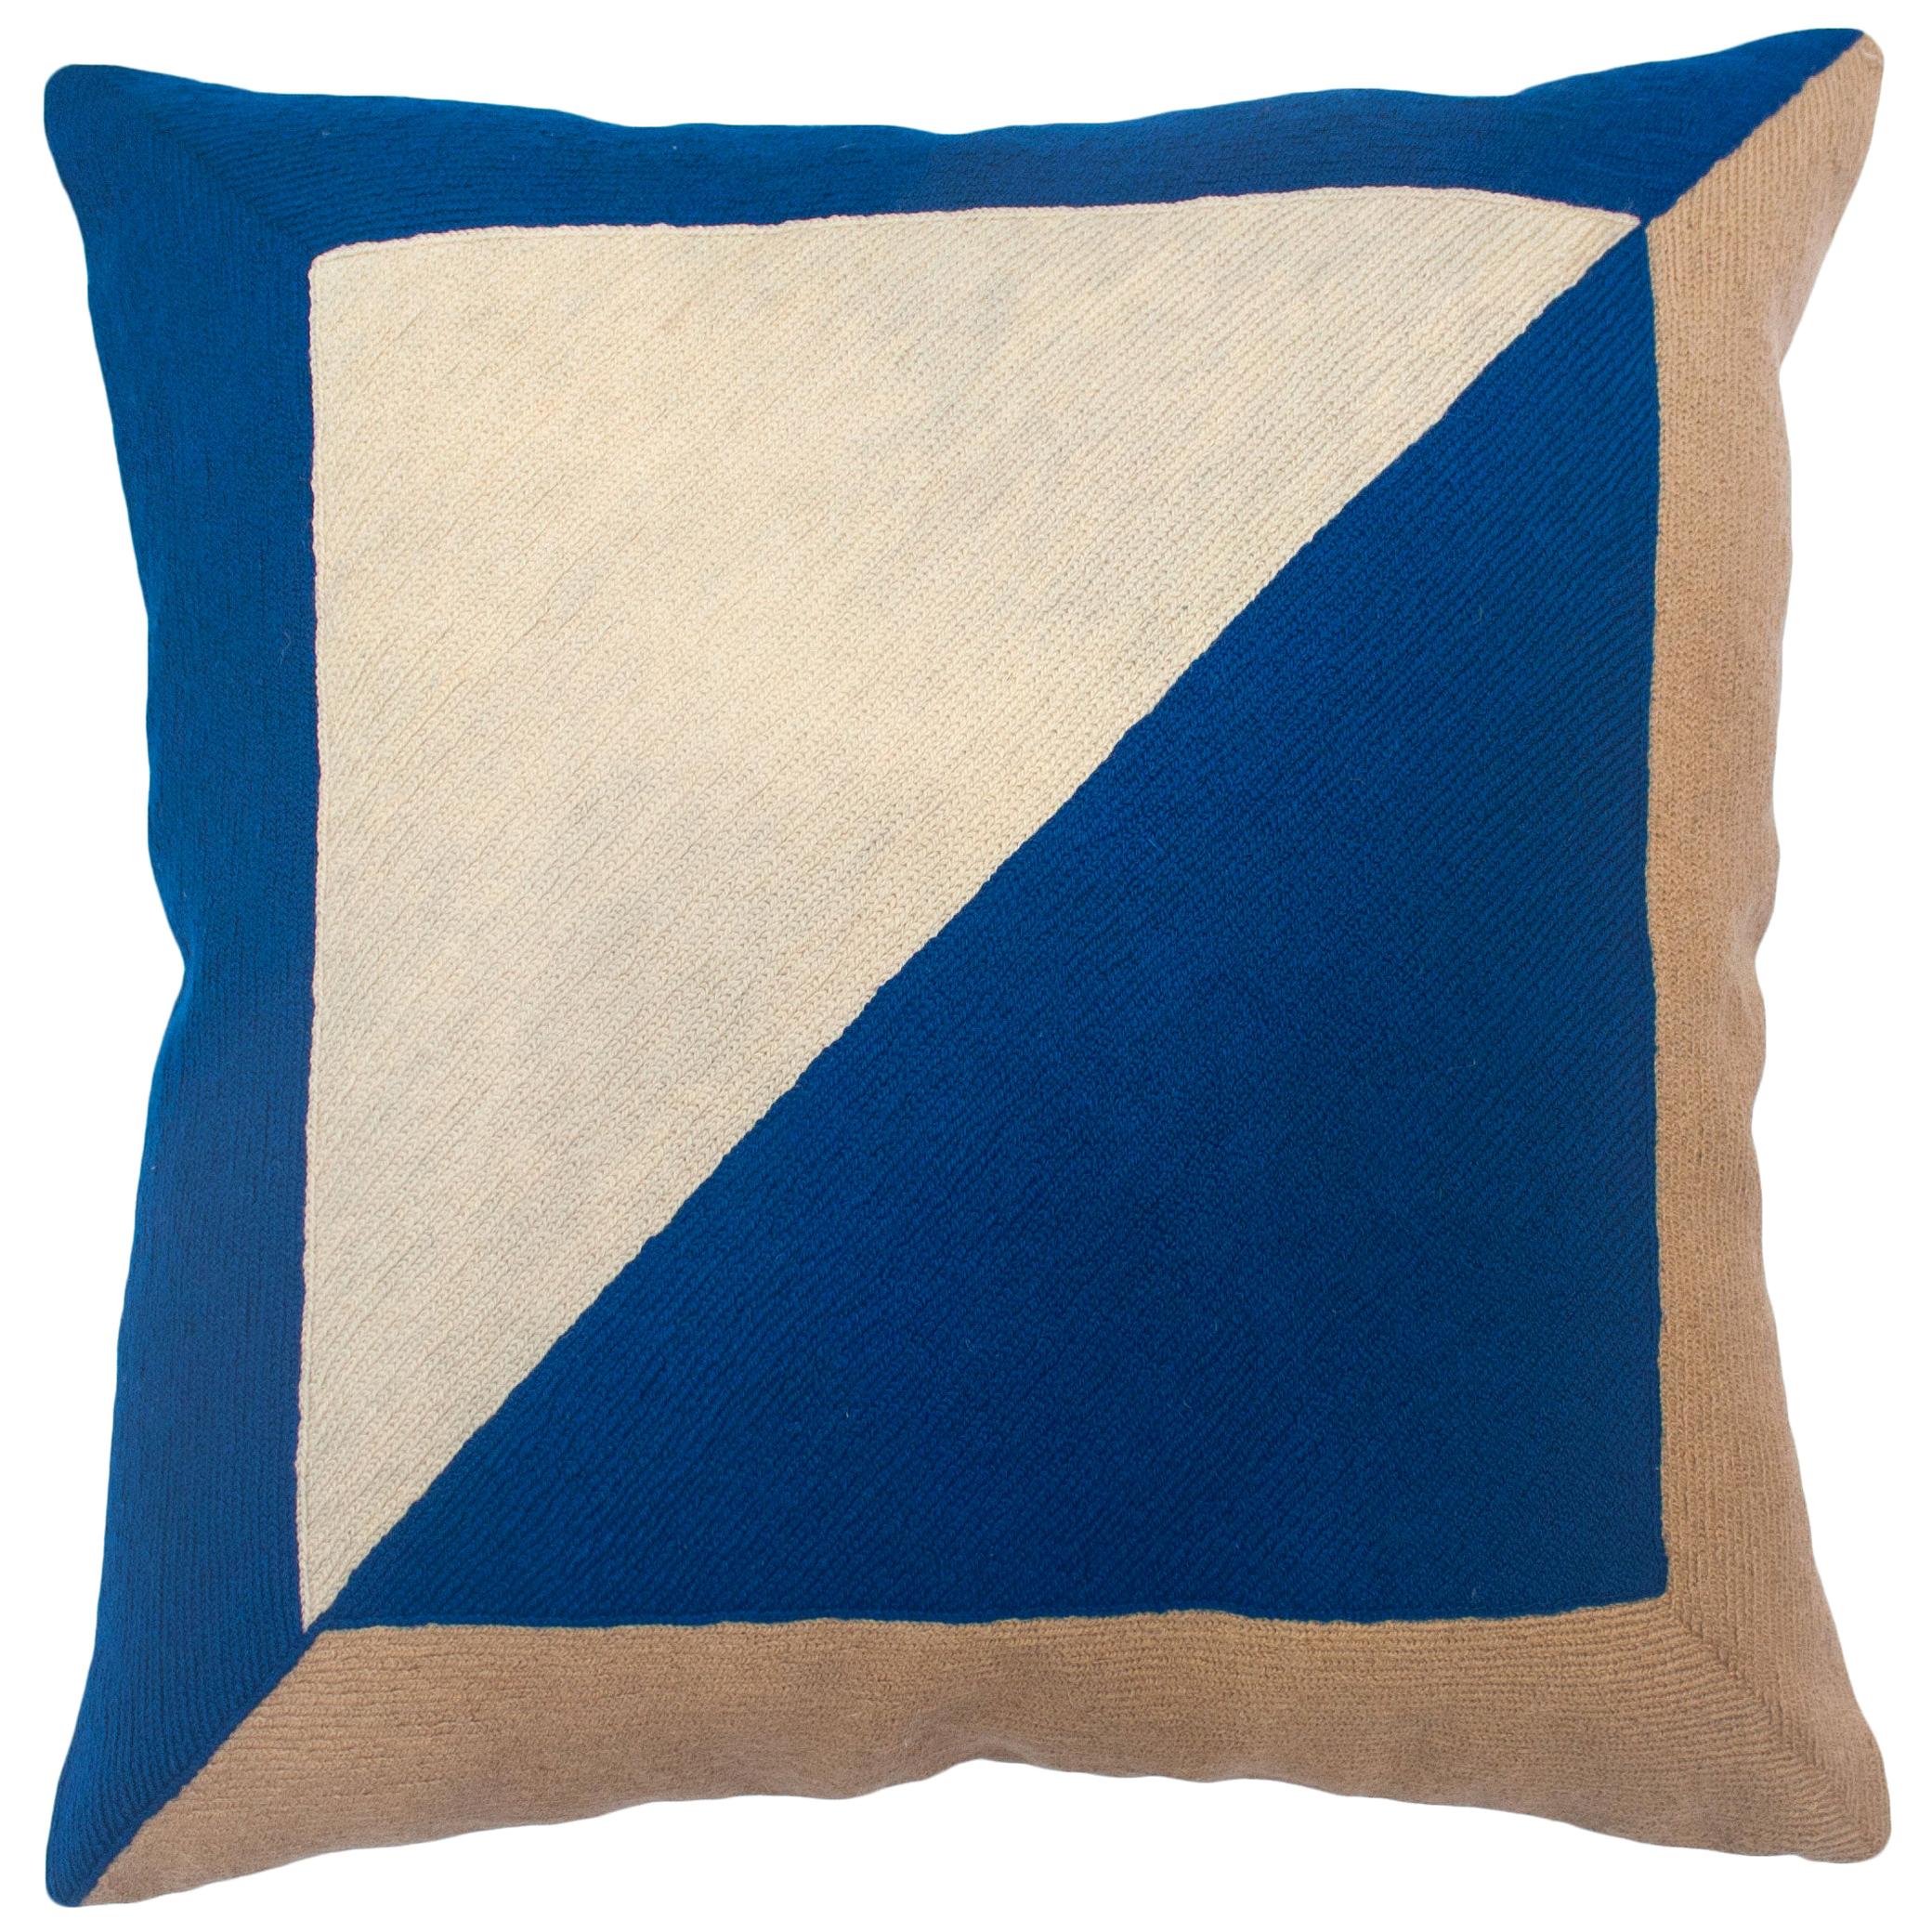 Marianne Square Blue Hand Embroidered Modern Geometric Throw Pillow Cover